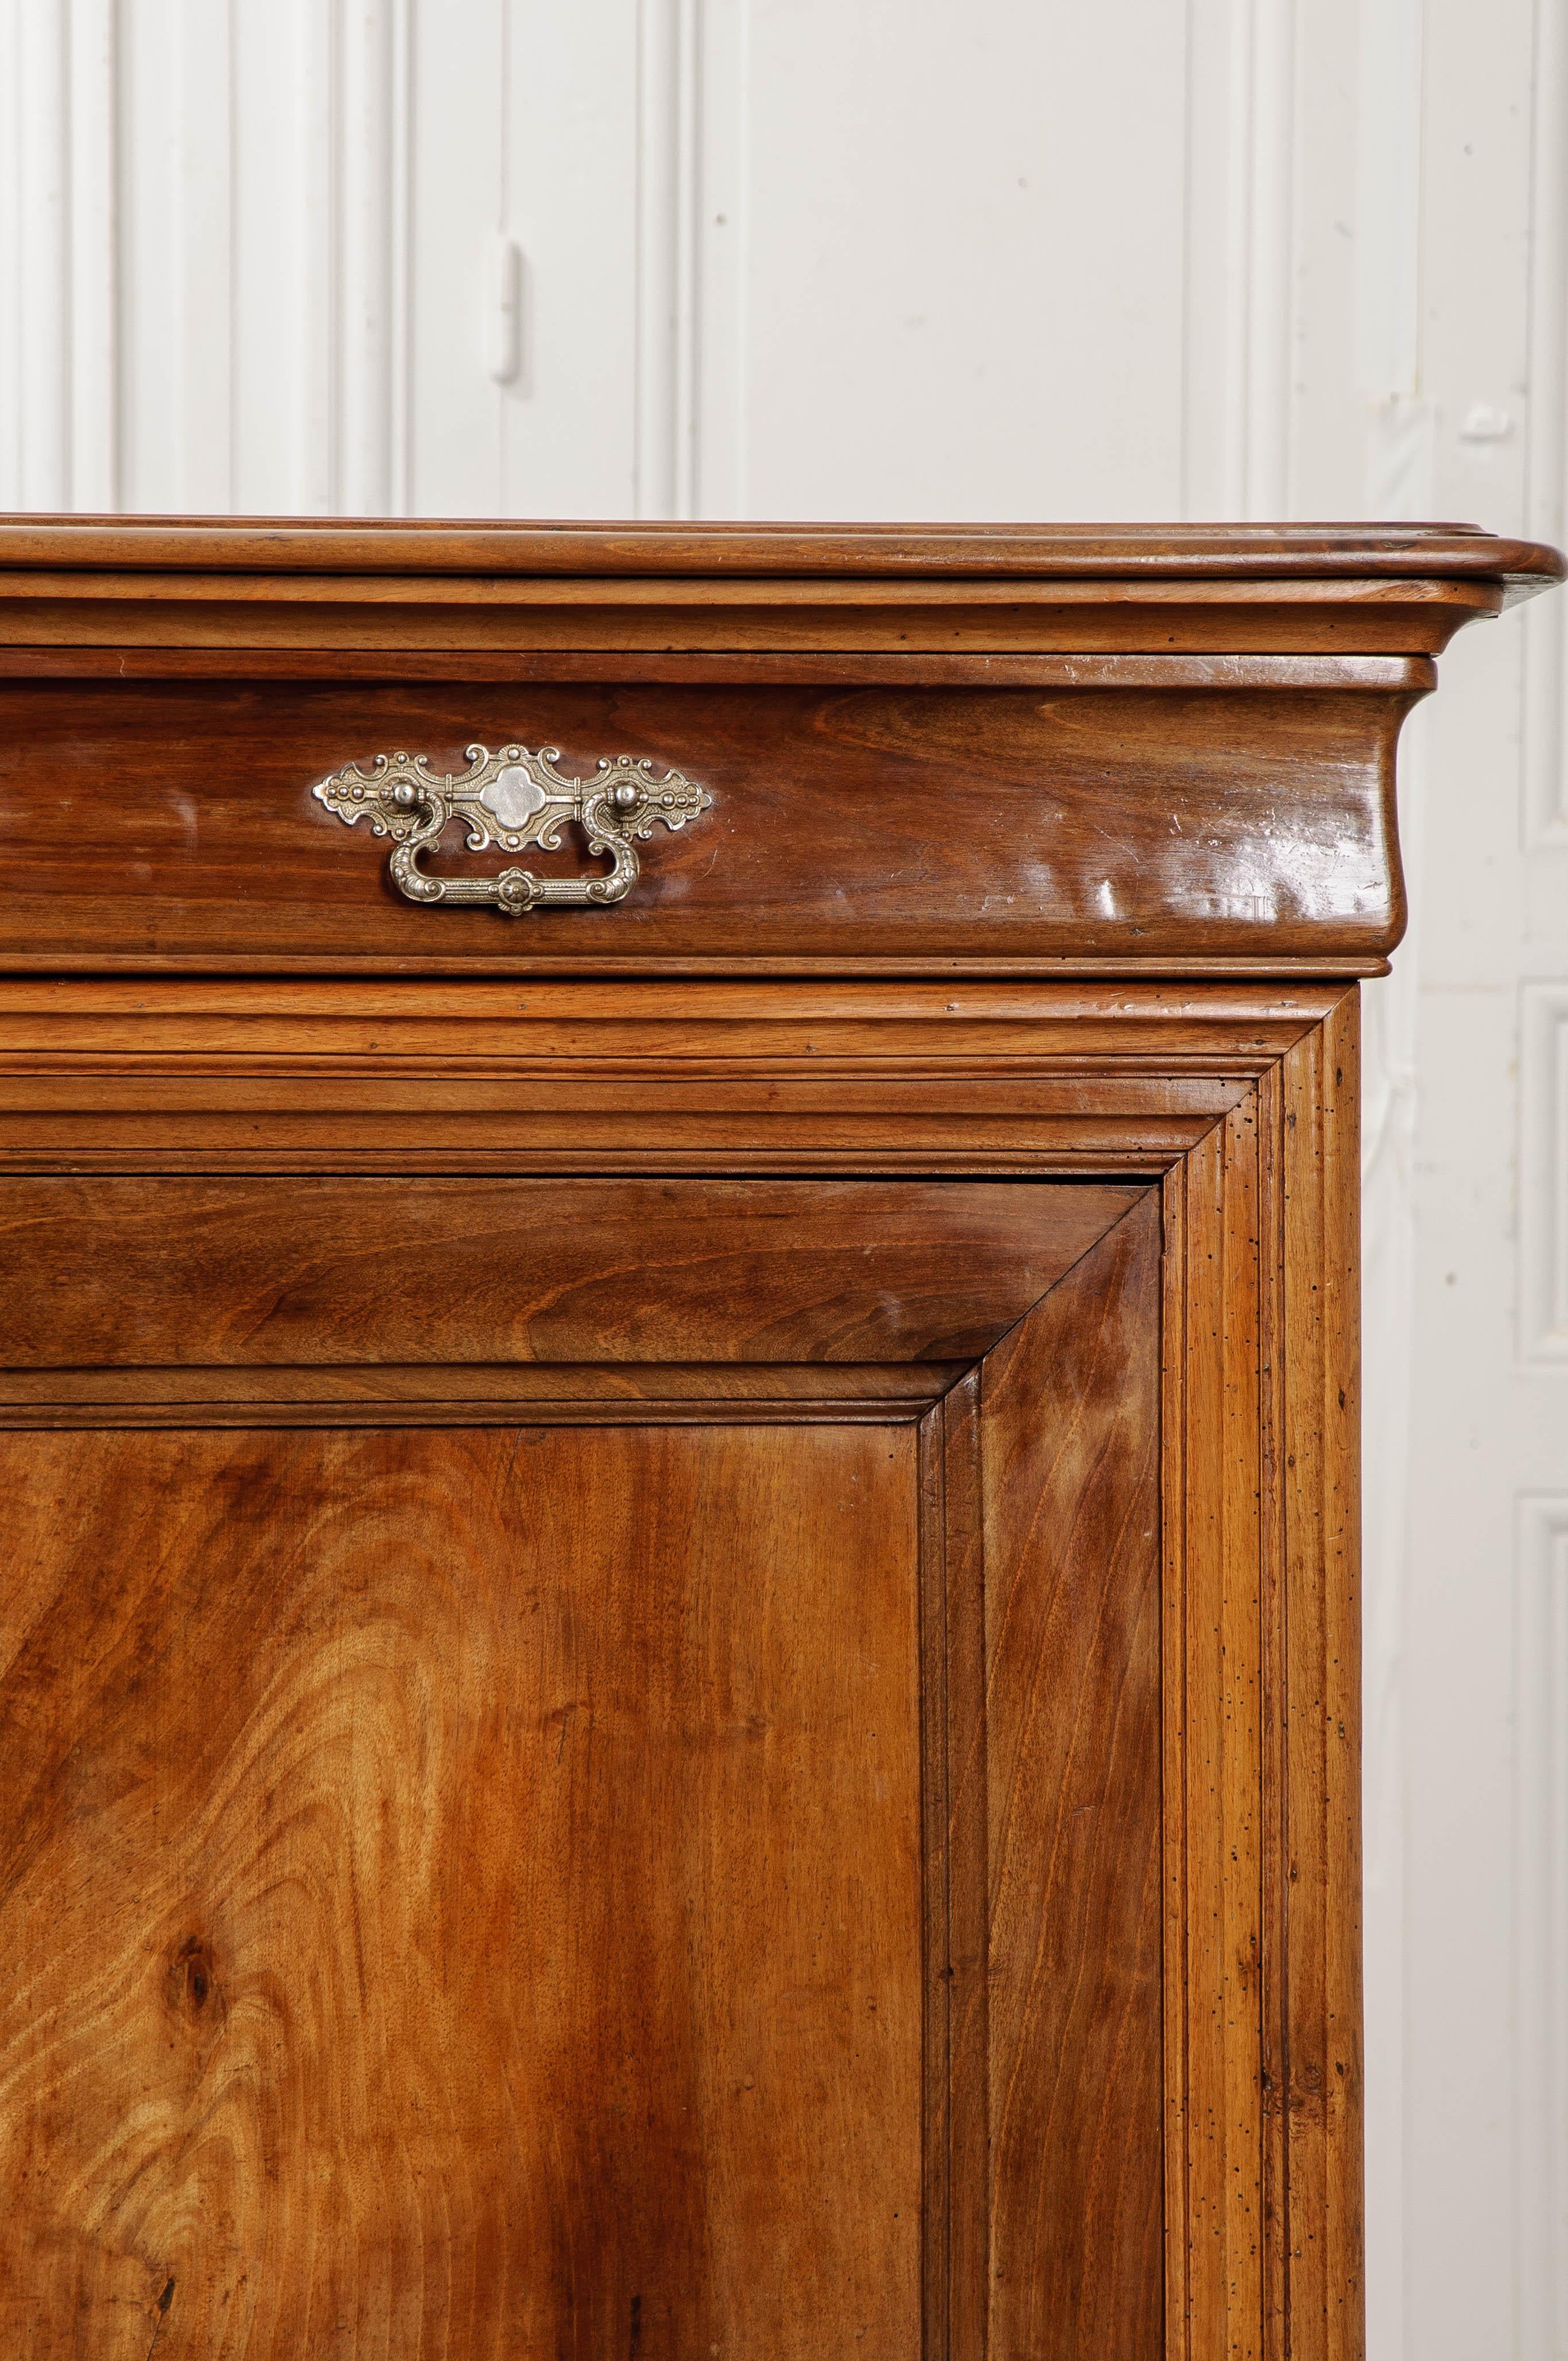 A delightful Louis Philippe fruitwood buffet, made in France, circa 1870. This wonderful antique buffet is teeming with Provincial charm. The solid antique fruitwood is beautifully toned and has been used to make beautiful, moulded trim that